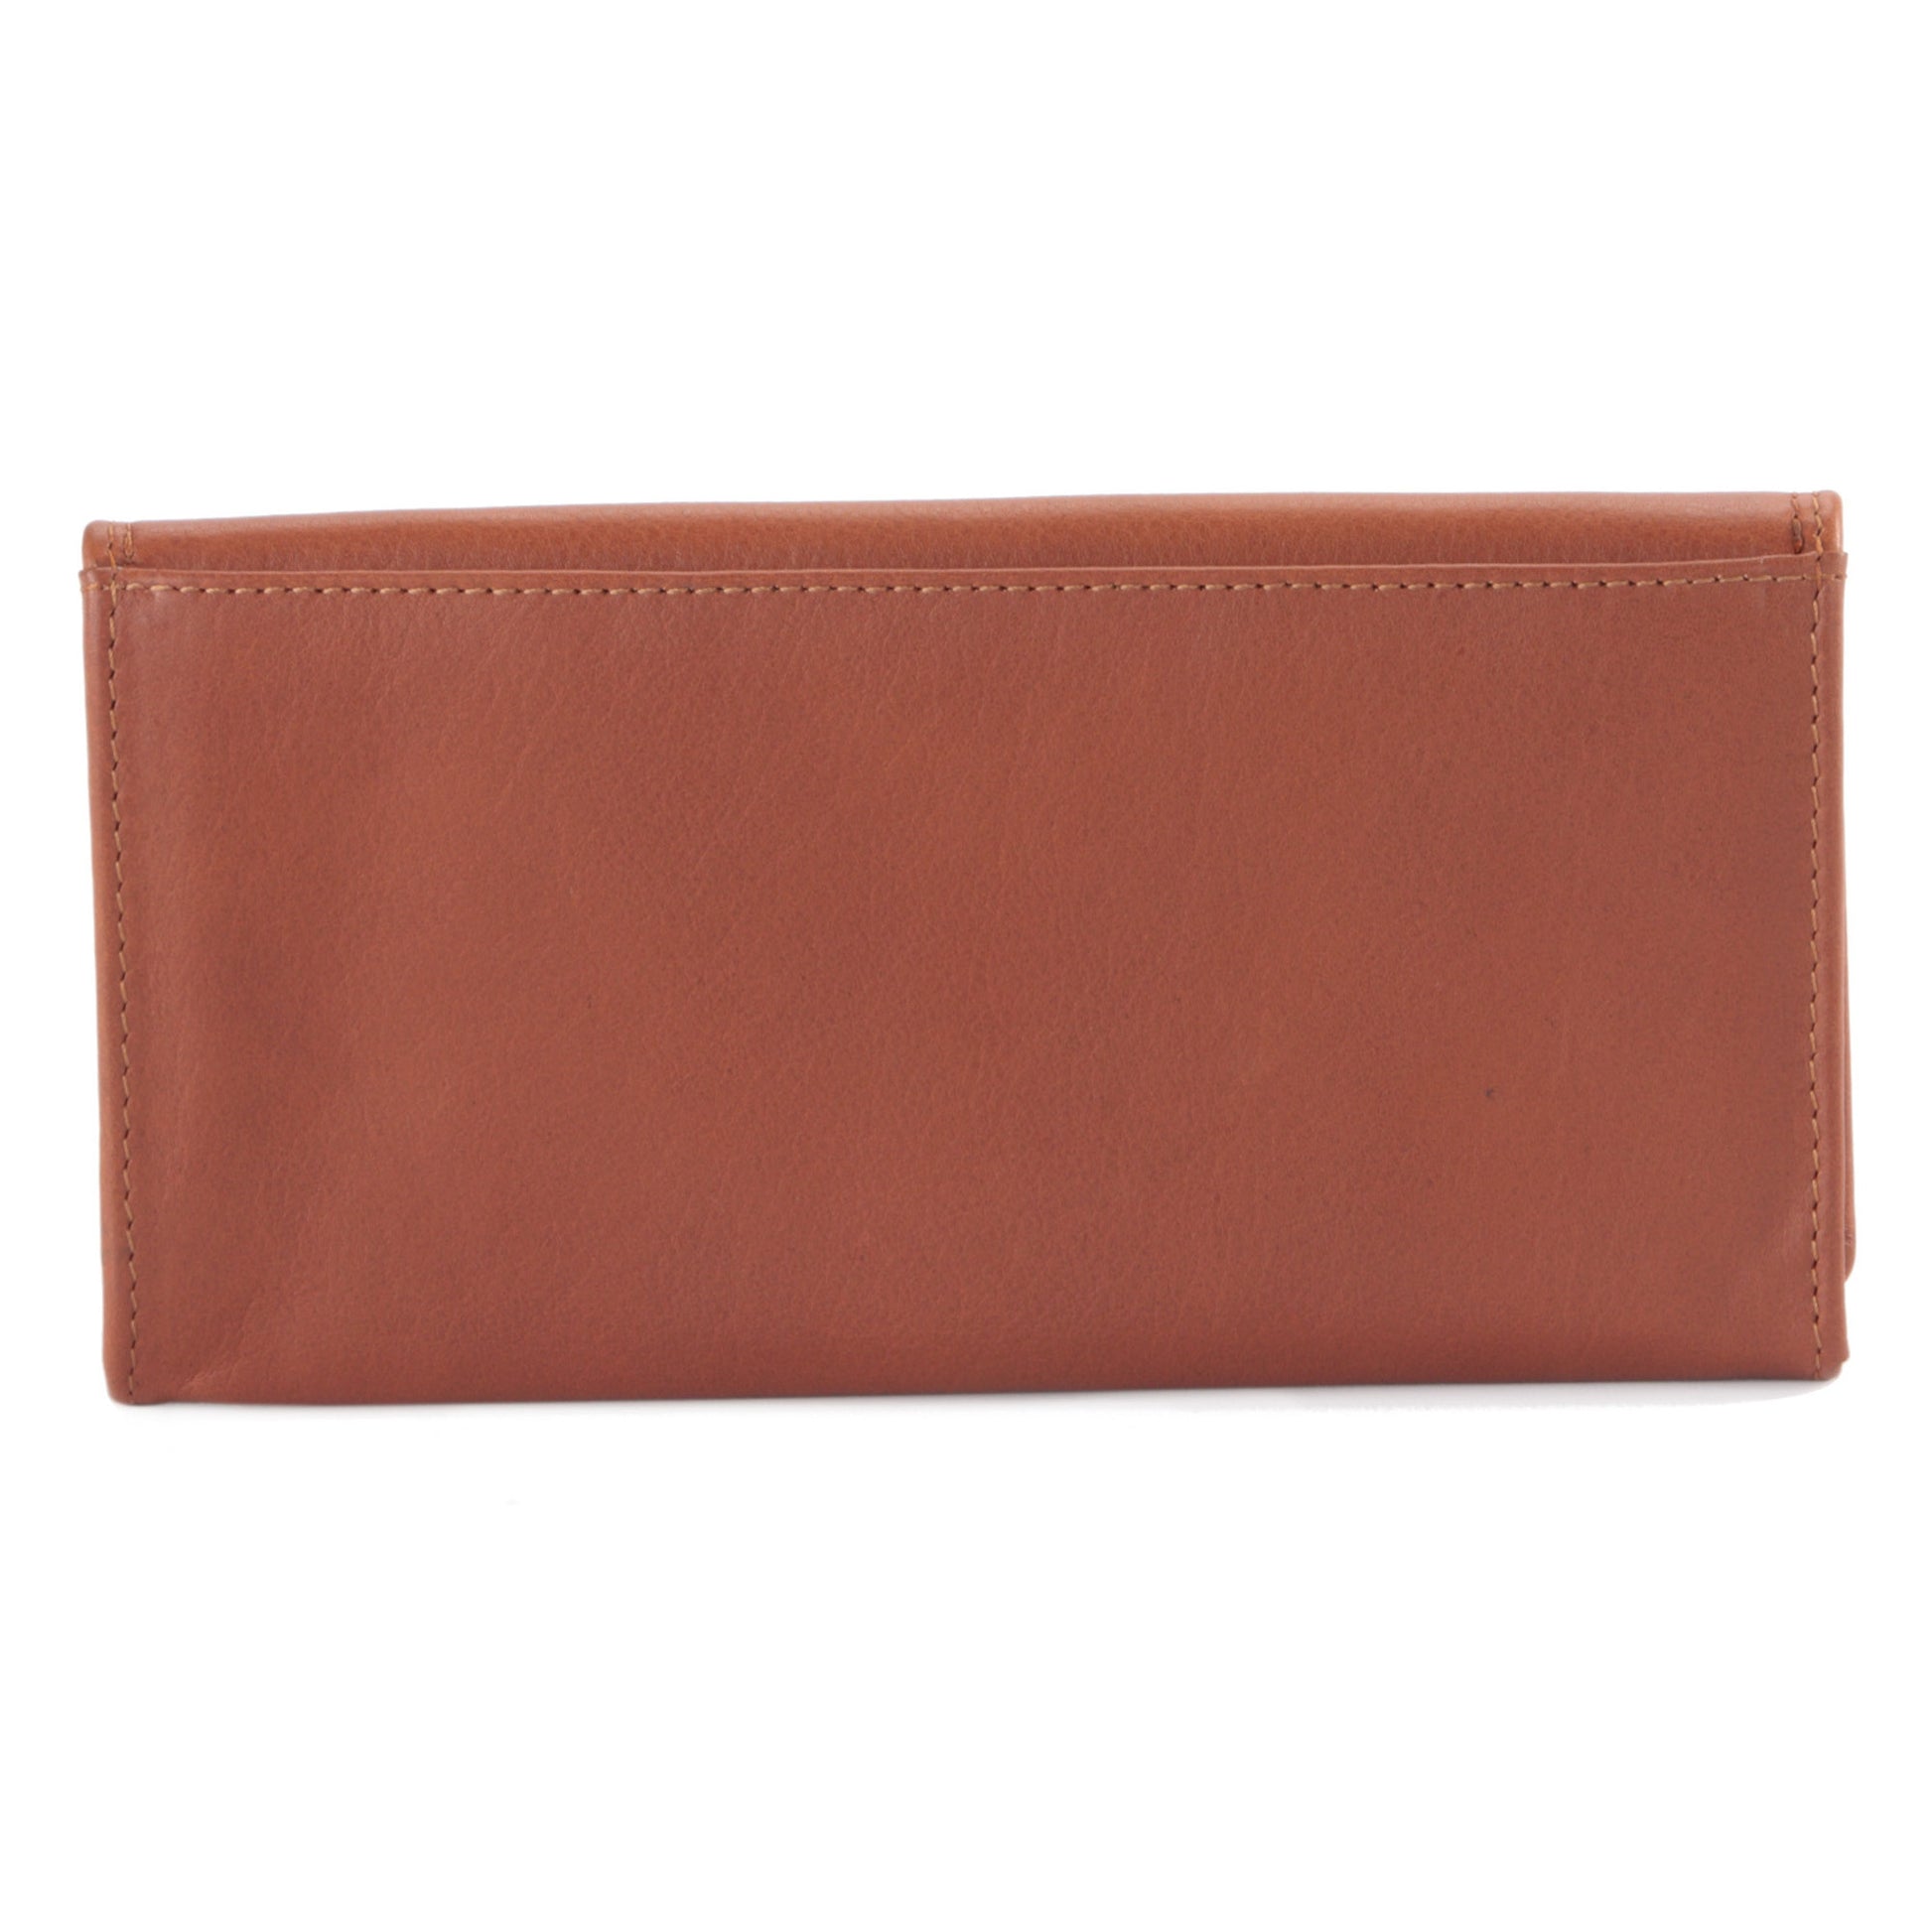 Ladies Clutch Wallet in Cow Leather - cognac or tan color - closed view back